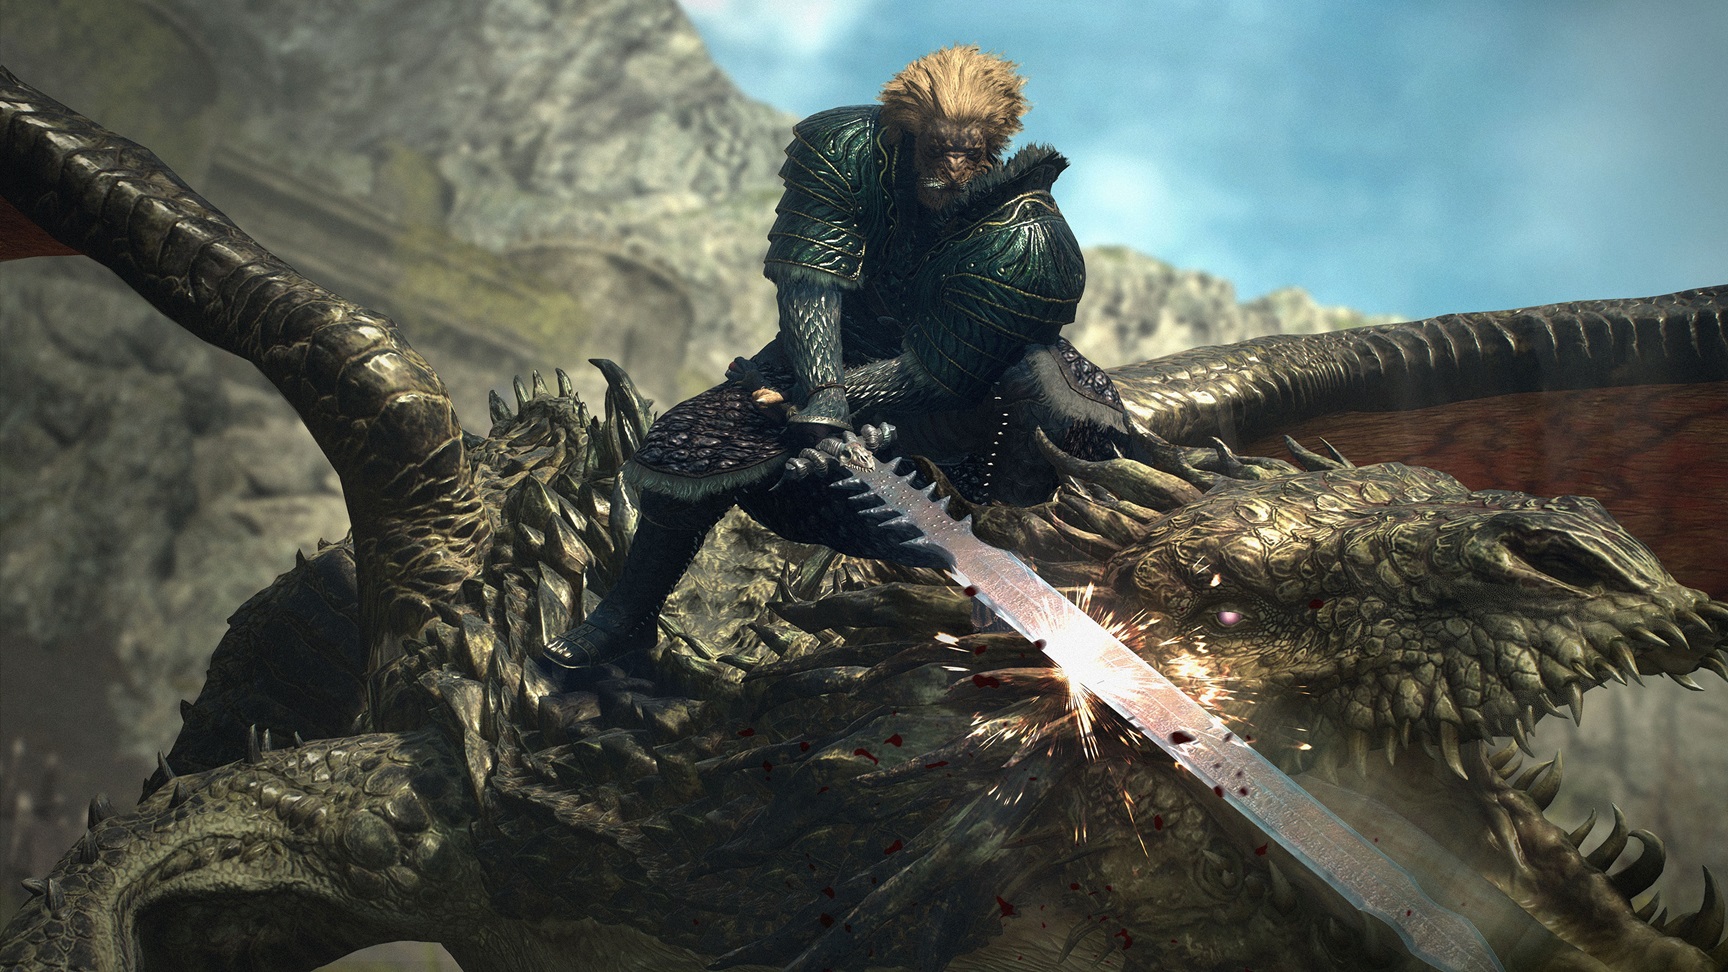 Dragon's Dogma 2 Confirmed for March 22nd 2024; New Trickster